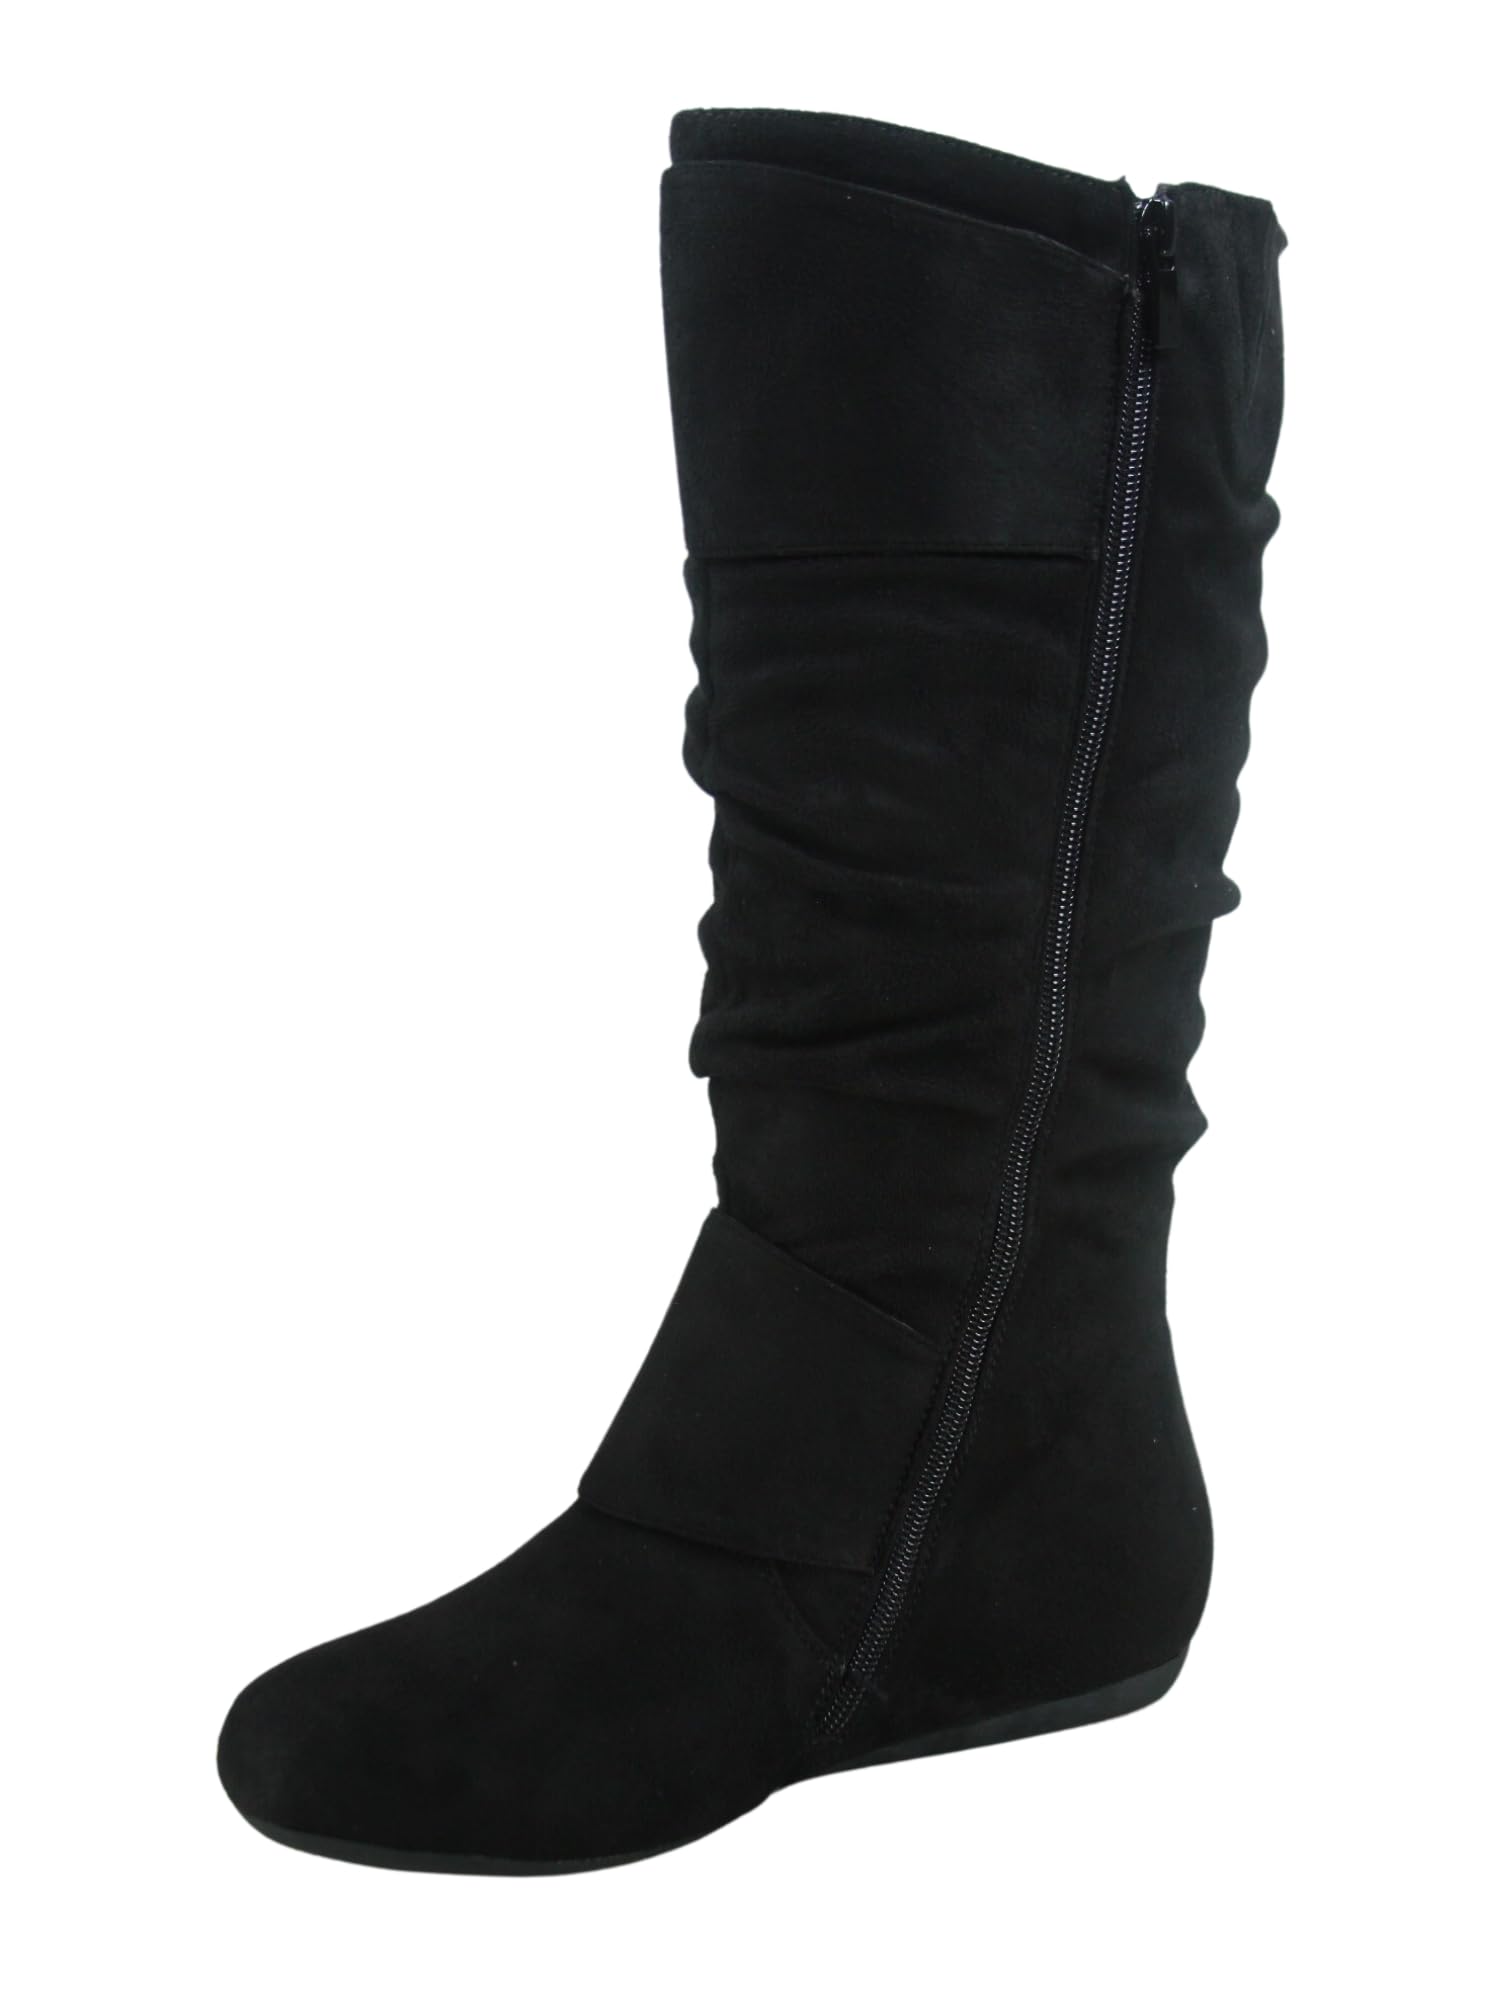 TZ Zone-38 Women's Closed Round Toe Flat Heel Buckle Slouchy Mid-Calf Casual Boots